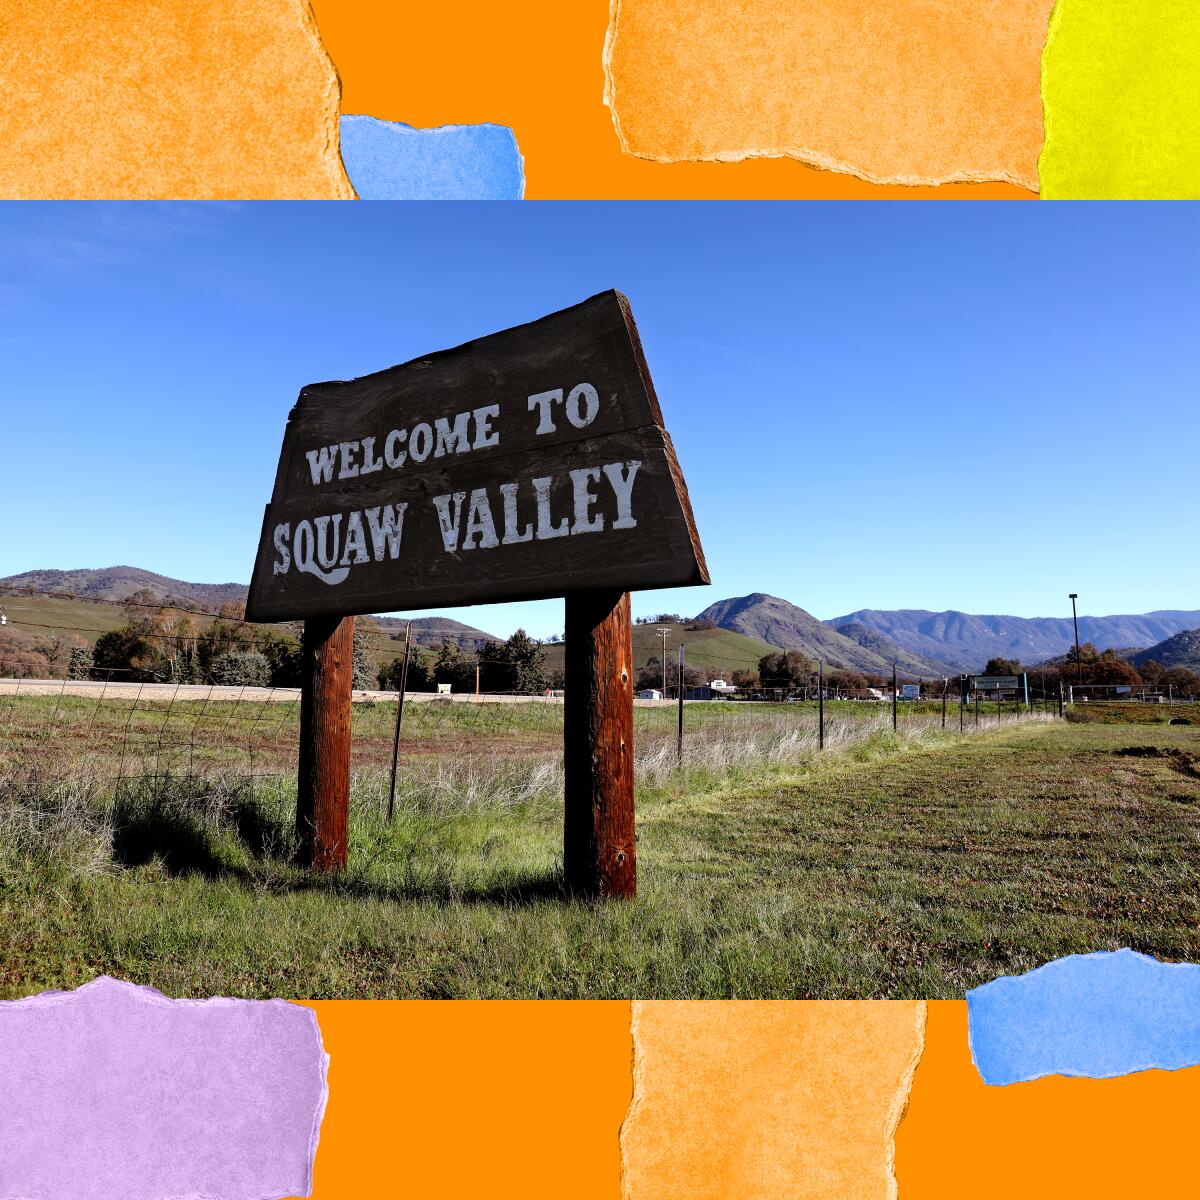 A sign next to a field and a fence reads "Welcome to Squaw Valley." Low mountains are on the horizon.